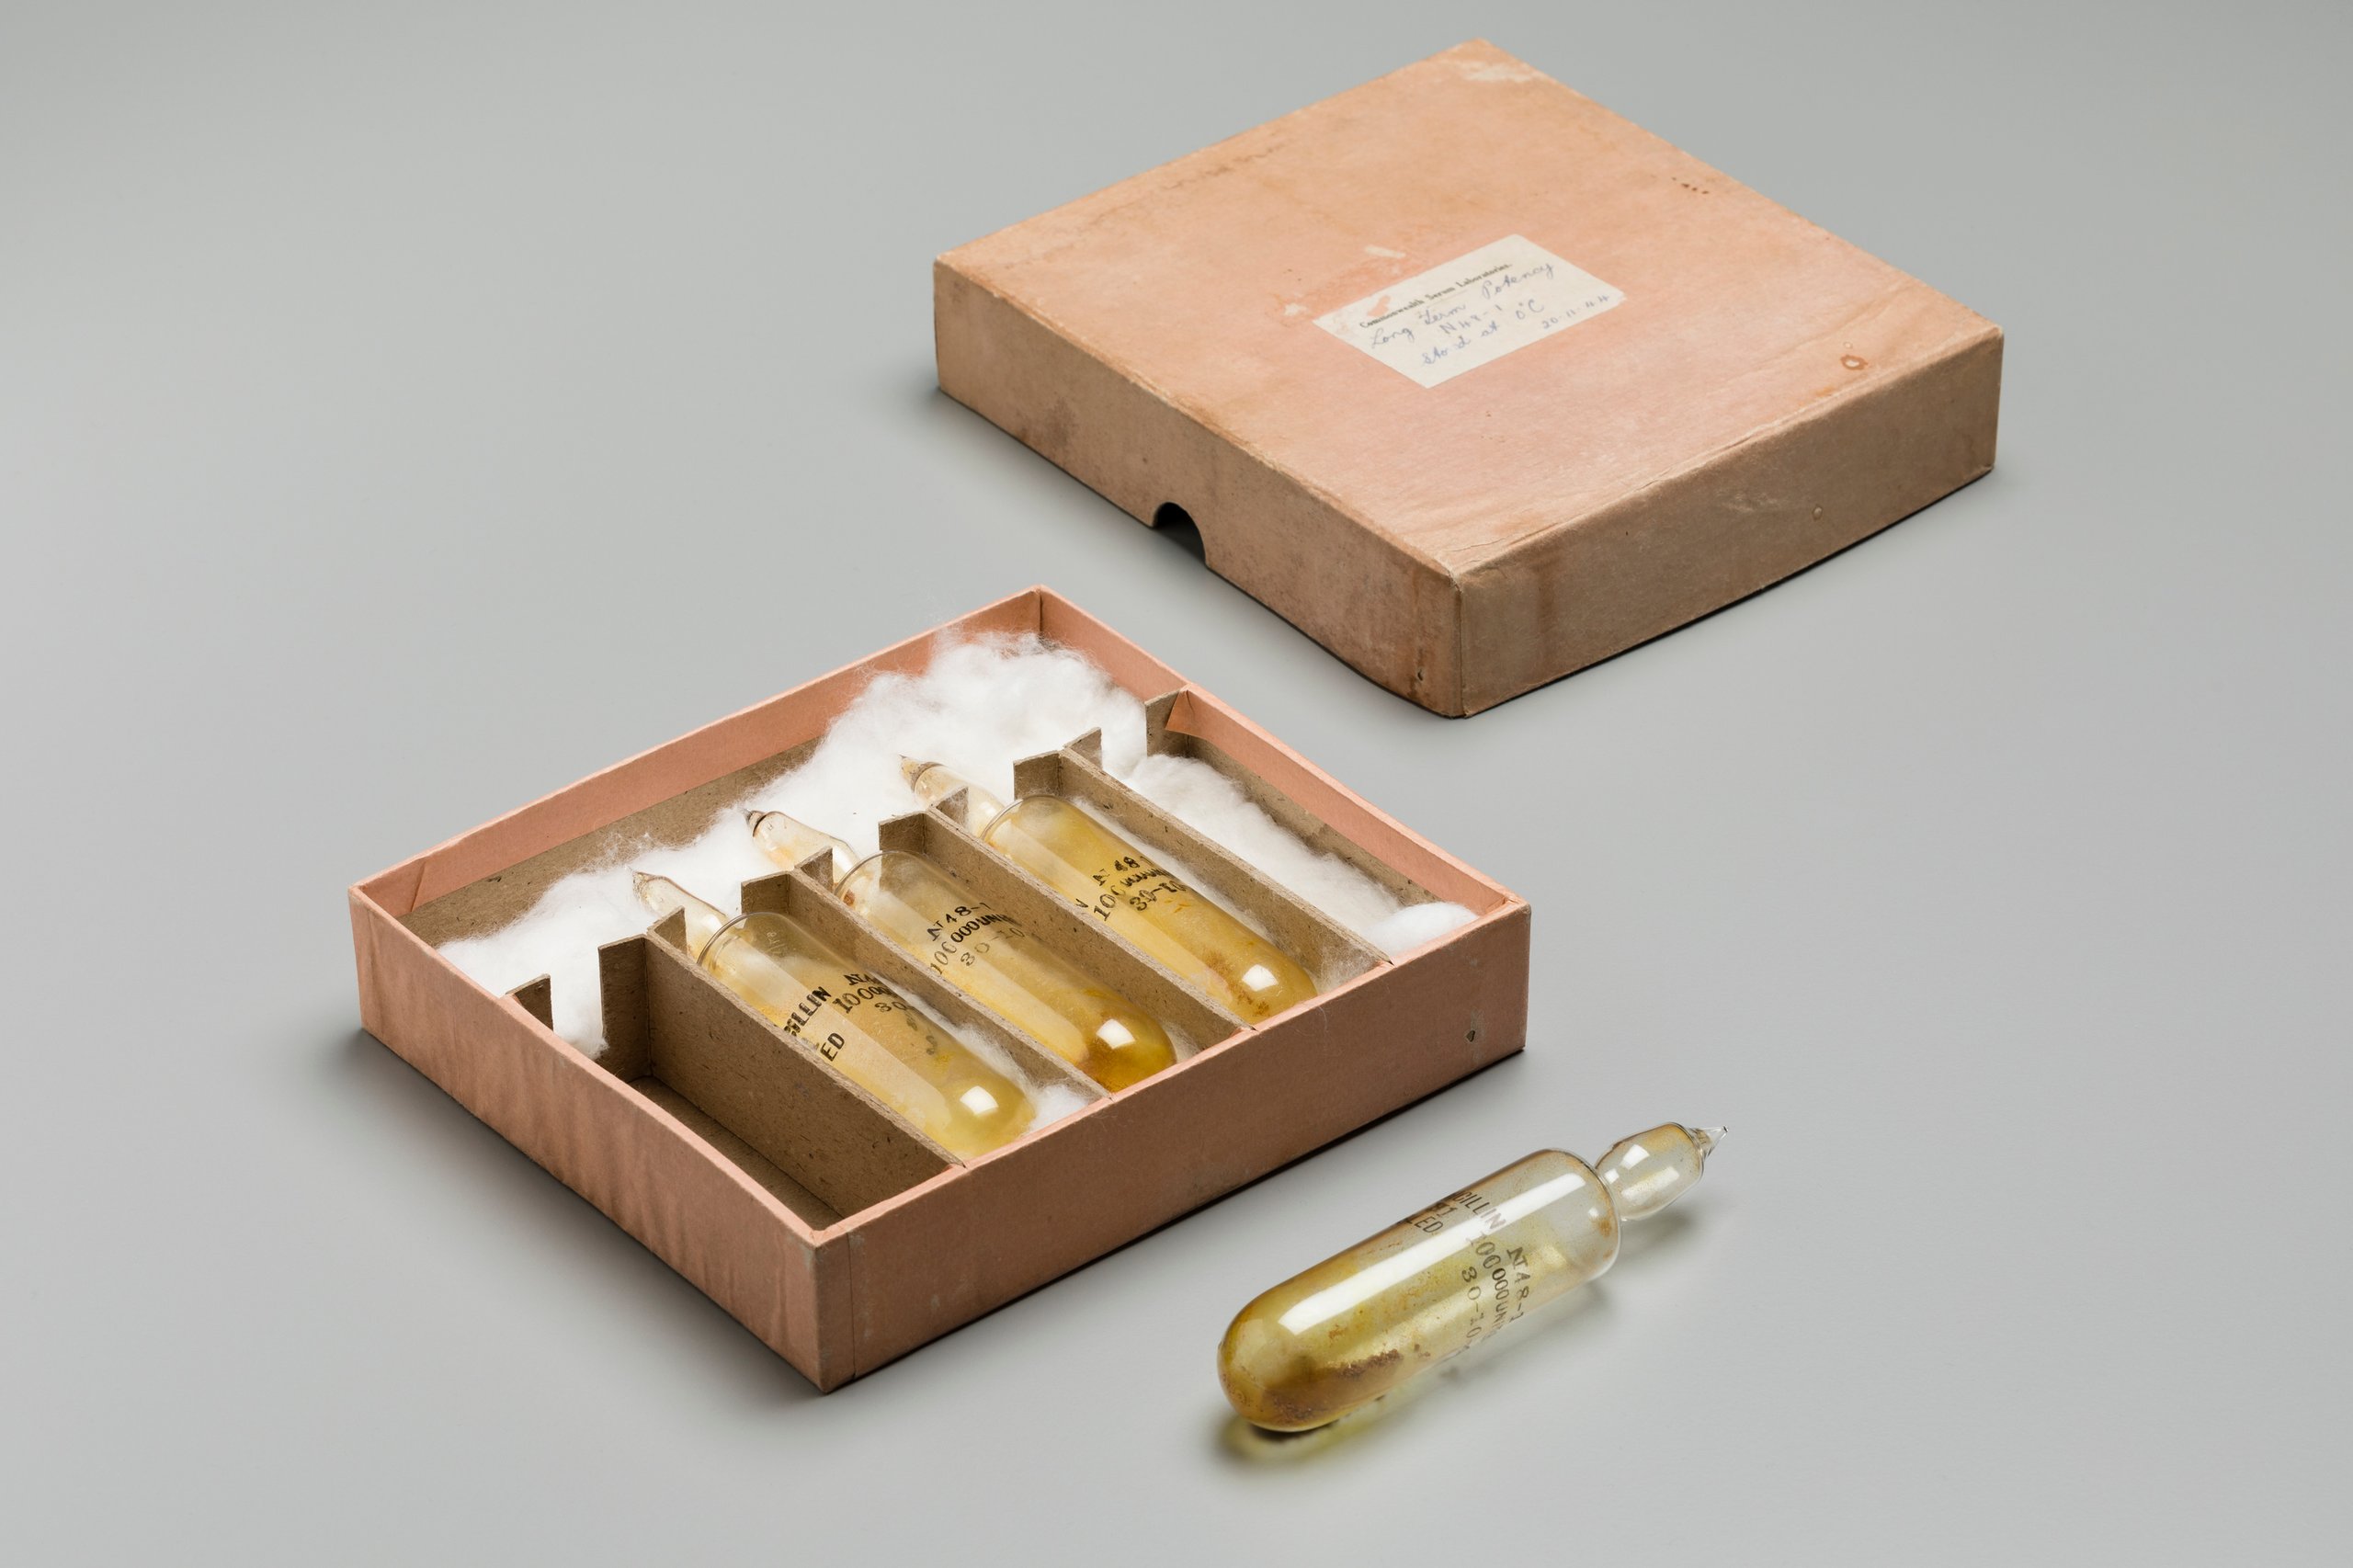 Ampoules and packaging by Commonwealth Serum Laboratories